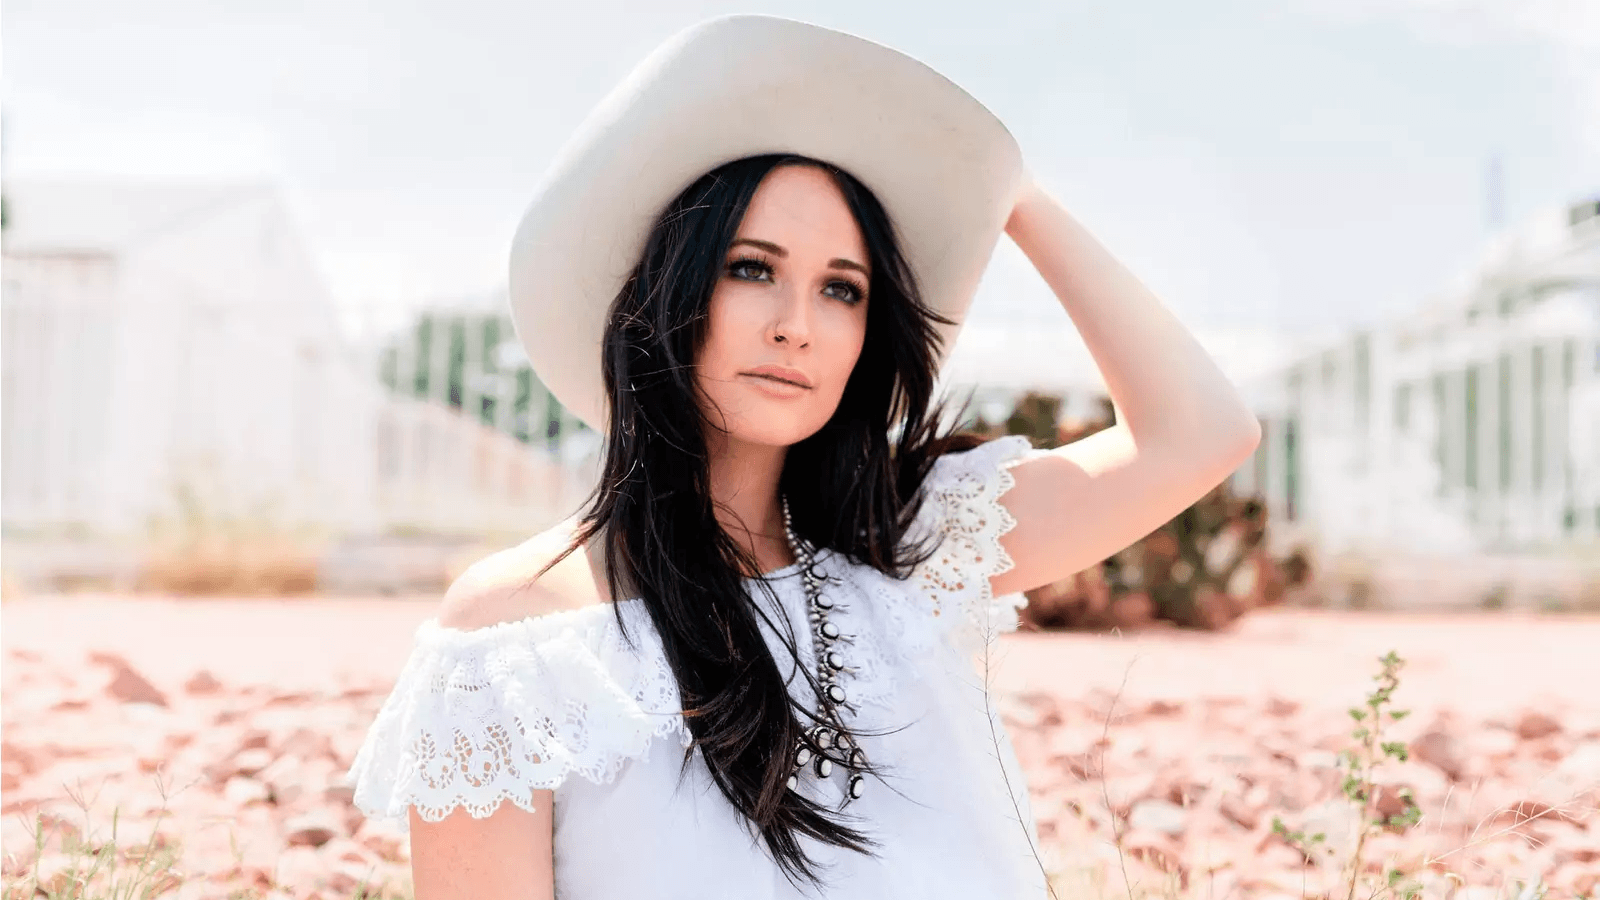 Review: Golden Hour by Kacey Musgraves Music Show